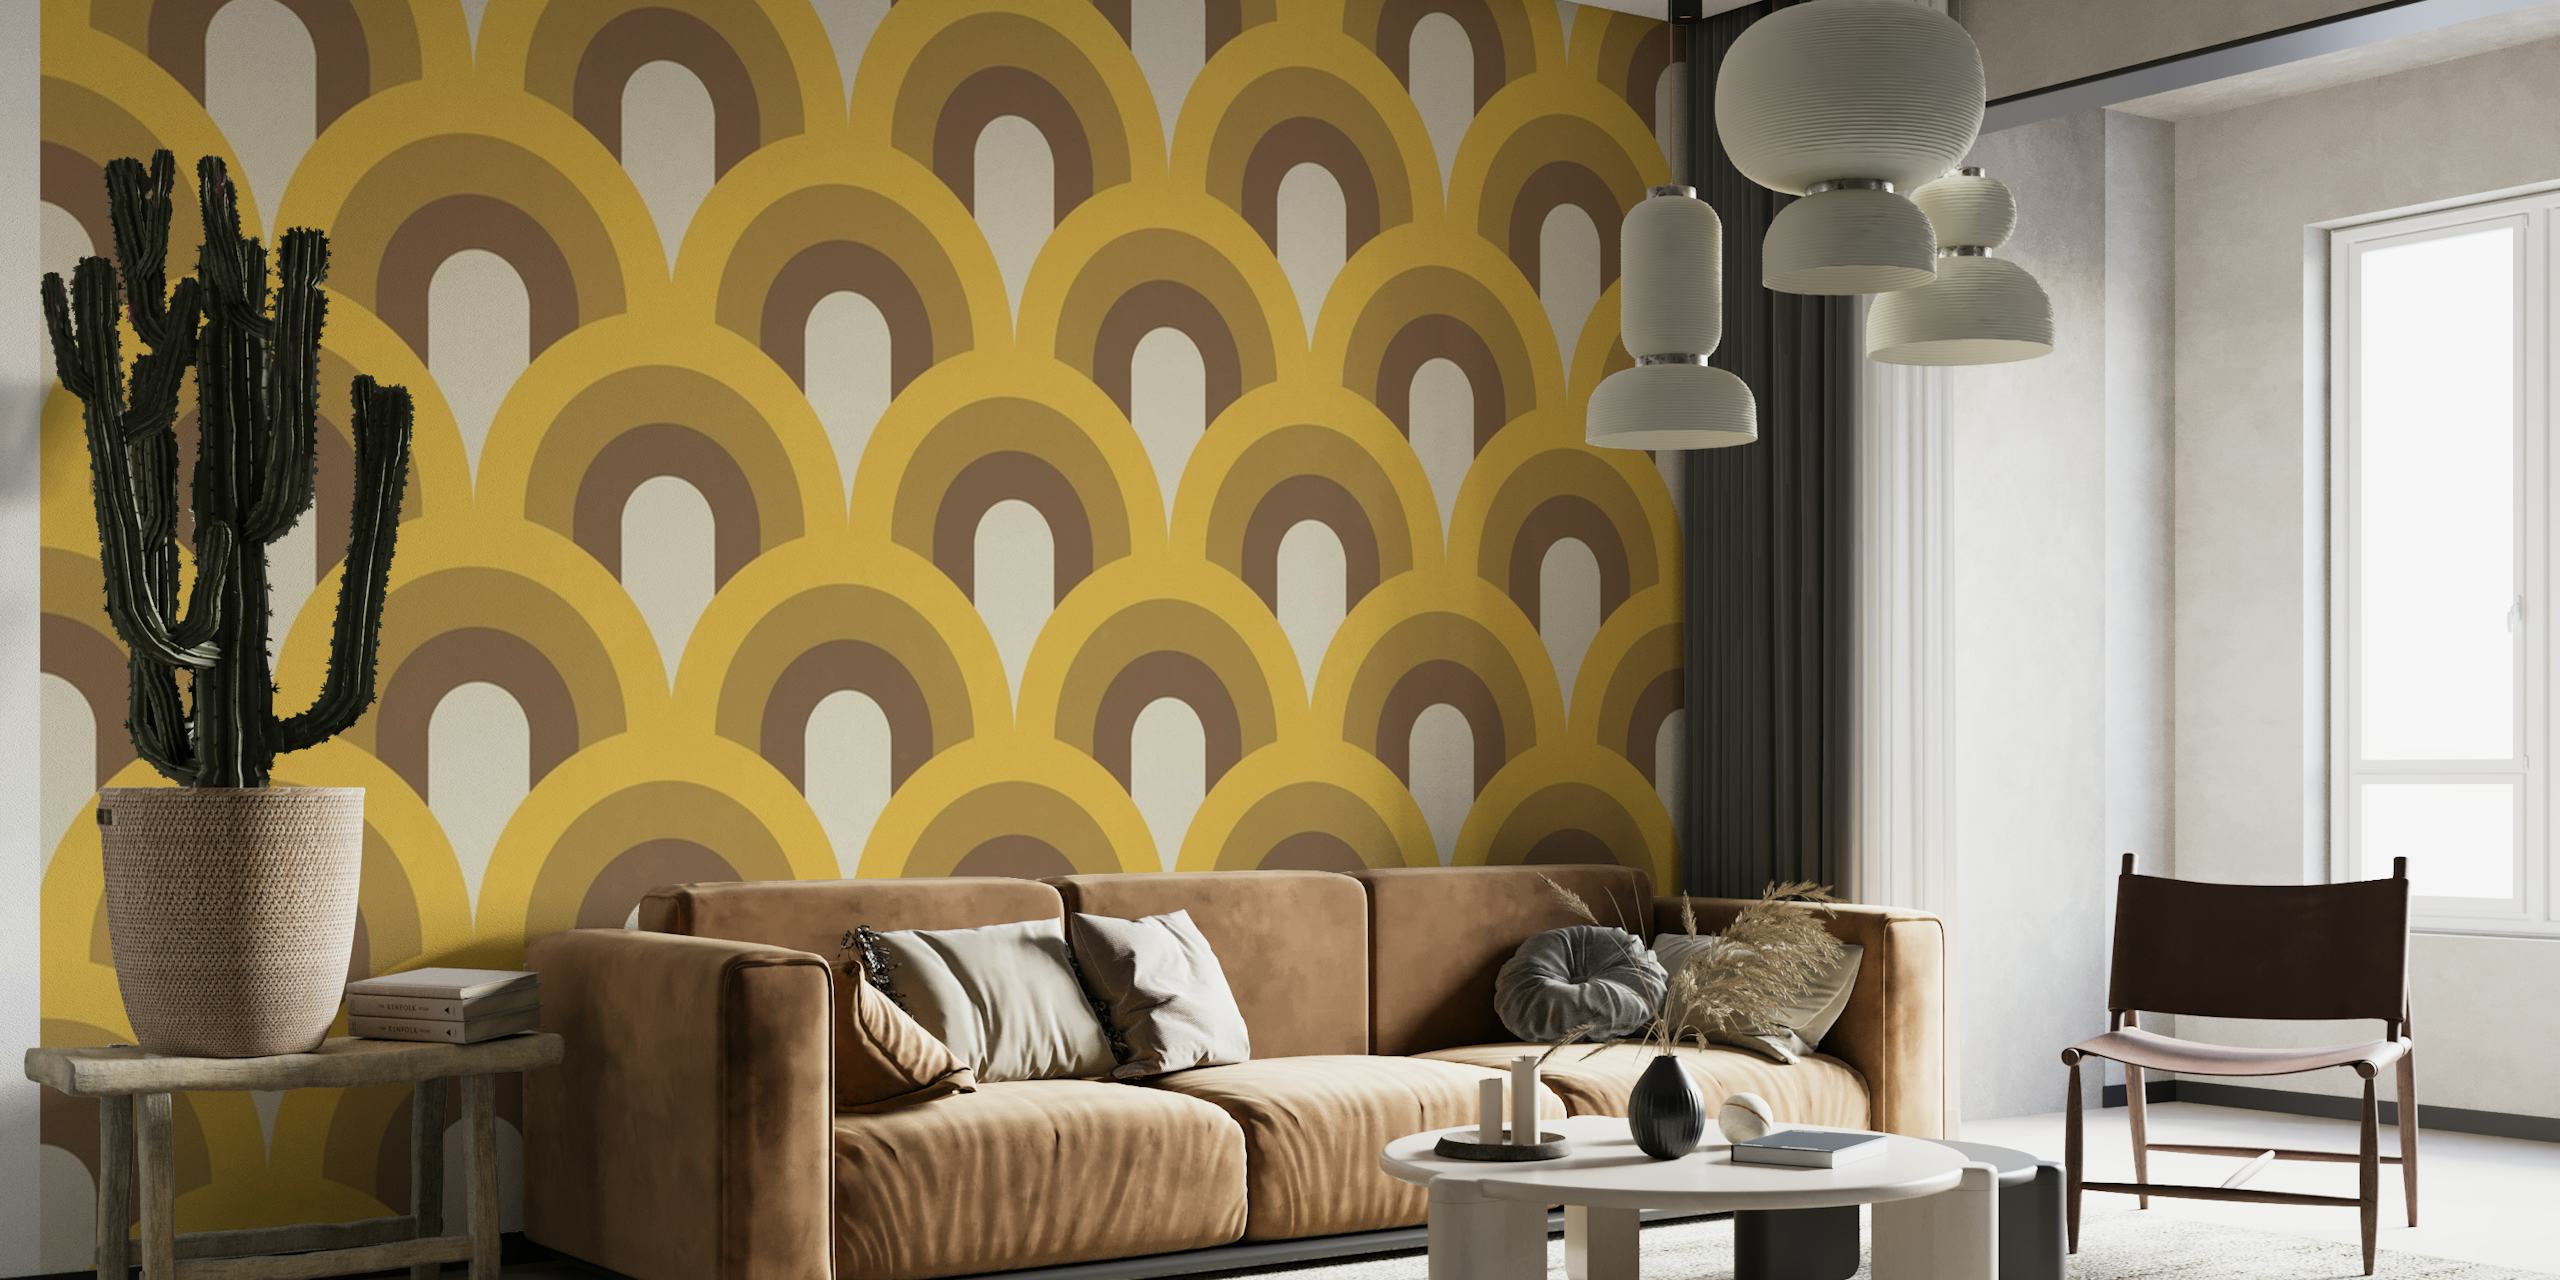 Retro-style rainbow arches wall mural in warm earth tones